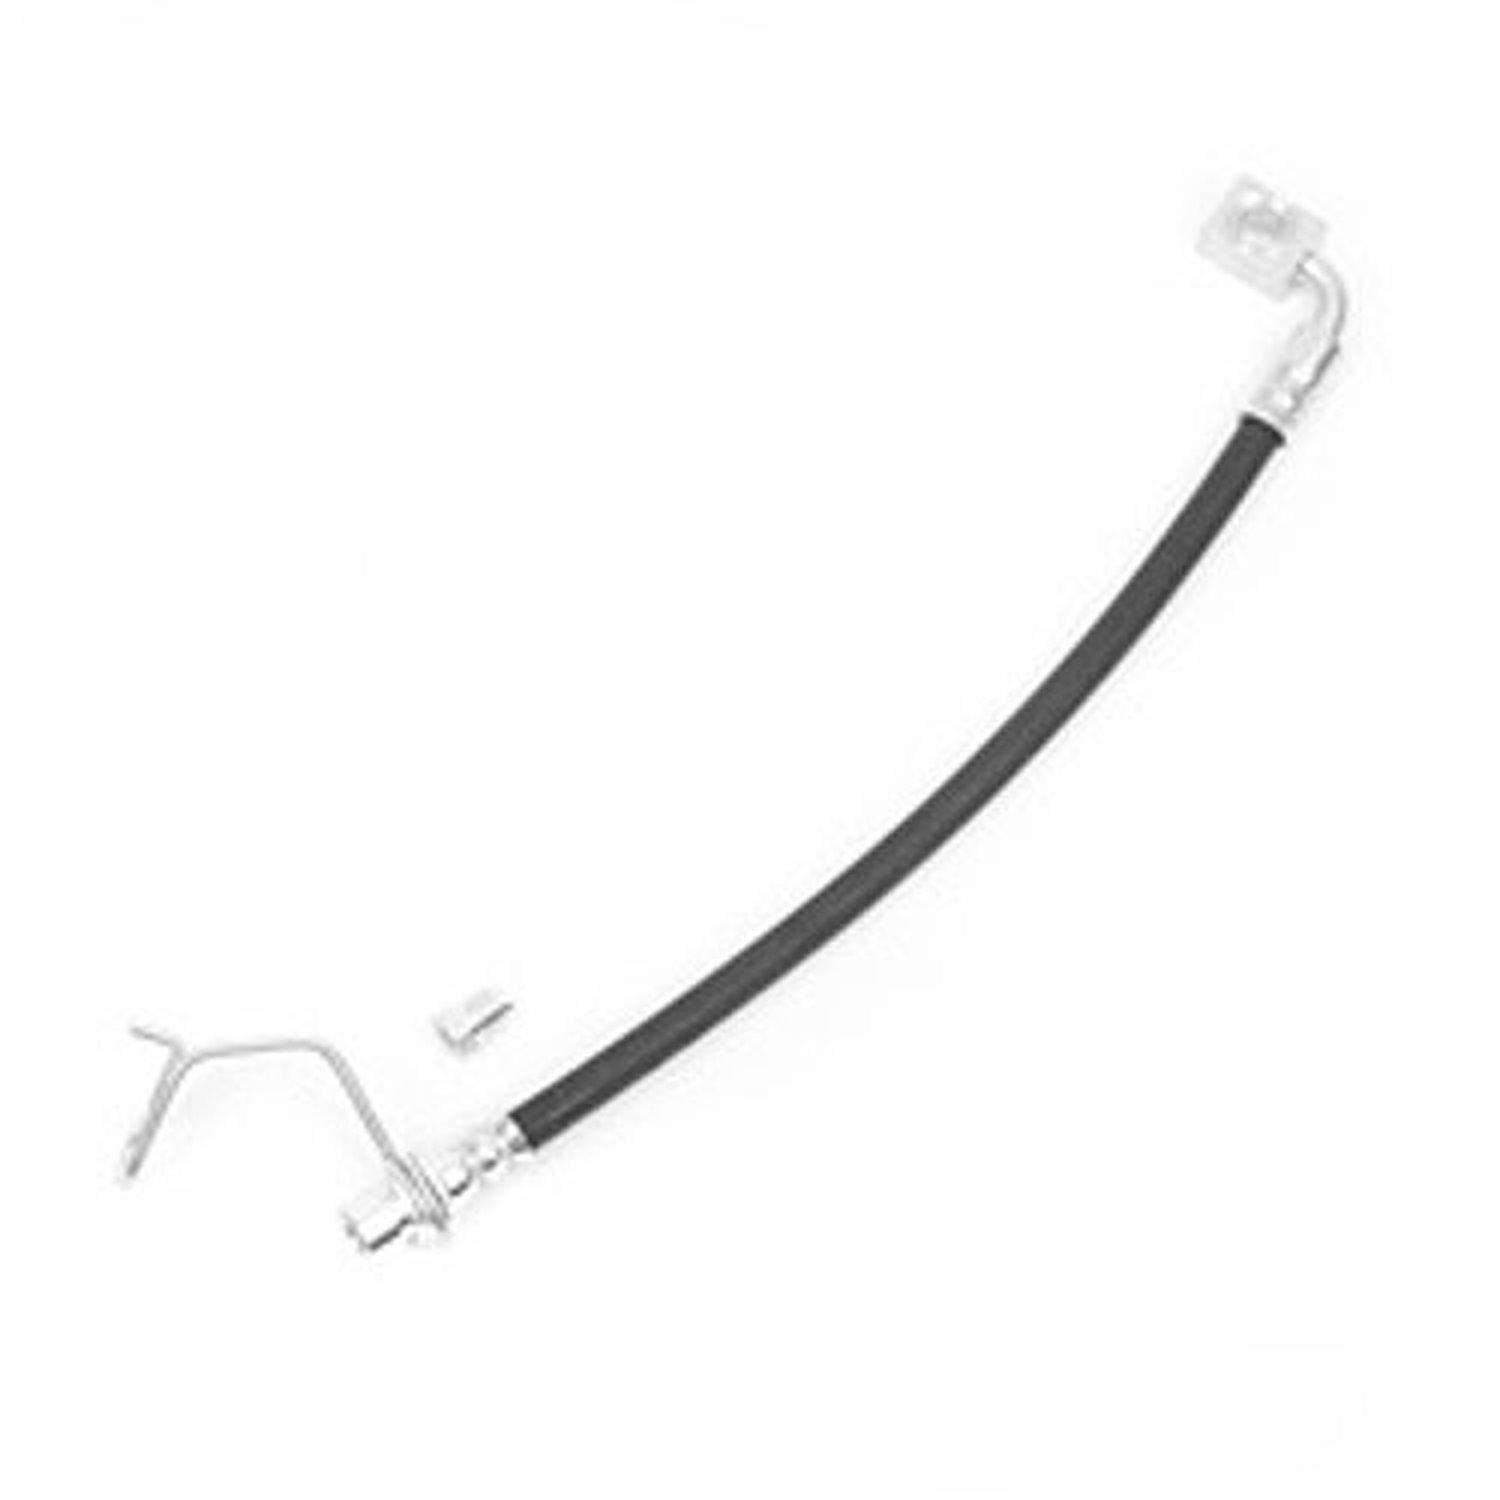 This left rear brake hose from Omix-ADA fits 08-12 Jeep Libertys.